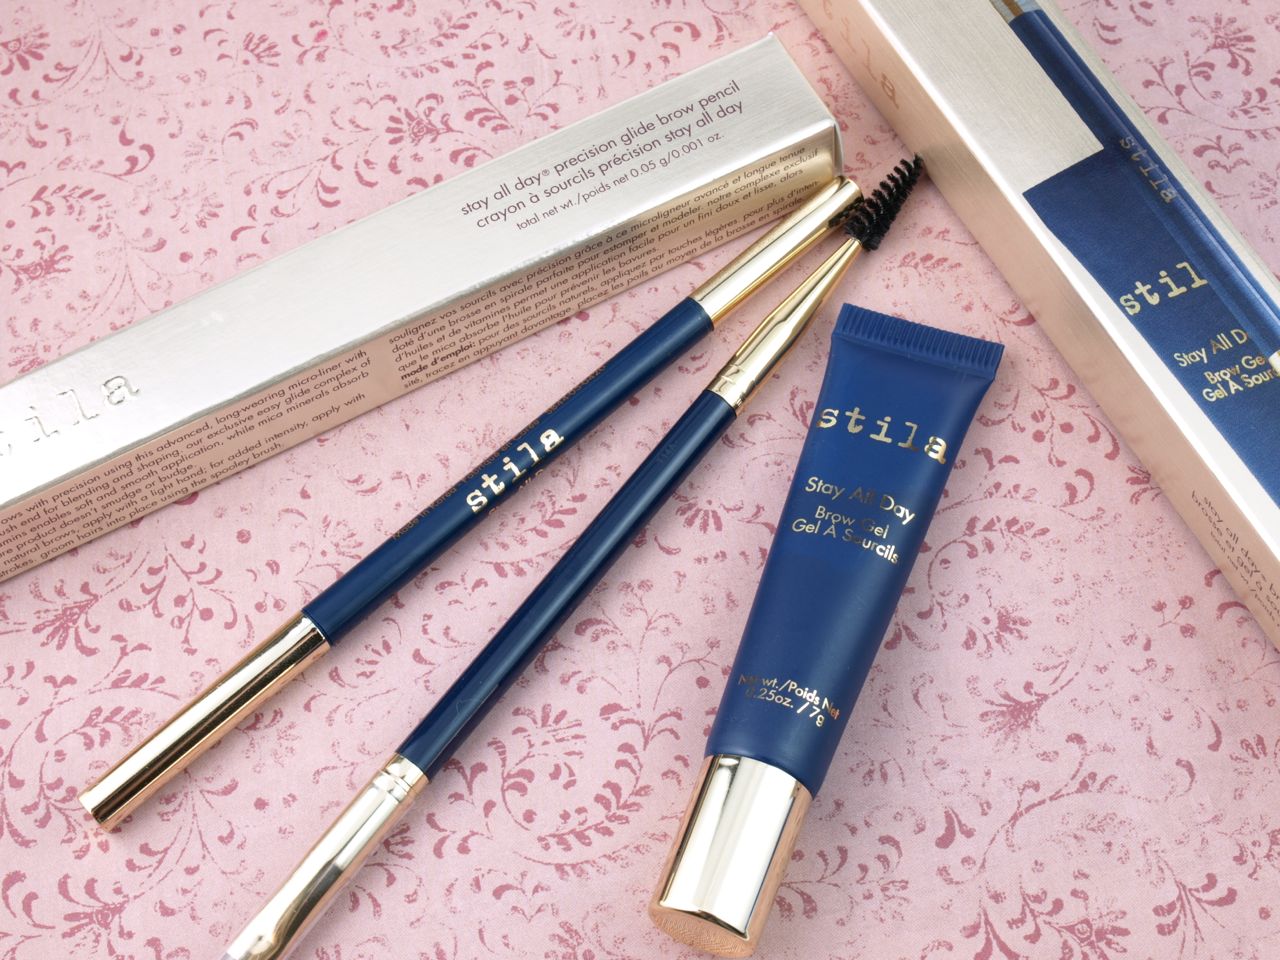 Stila Stay All Day Precision Glide Brow Pencil and Brow Gel in "Black": Review and Swatches